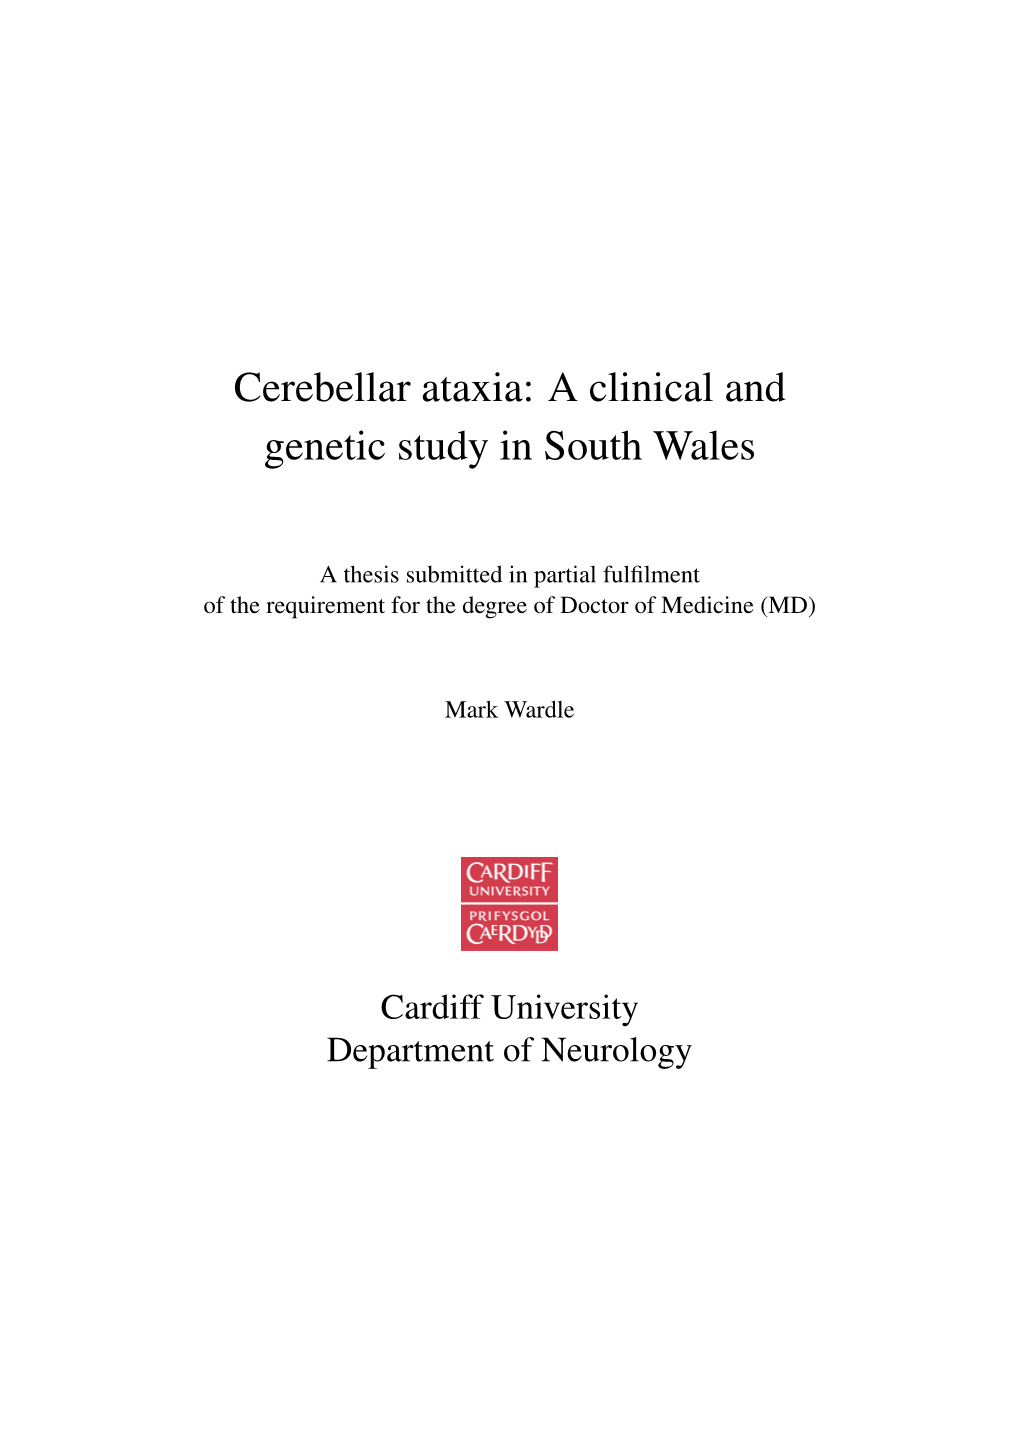 Cerebellar Ataxia: a Clinical and Genetic Study in South Wales